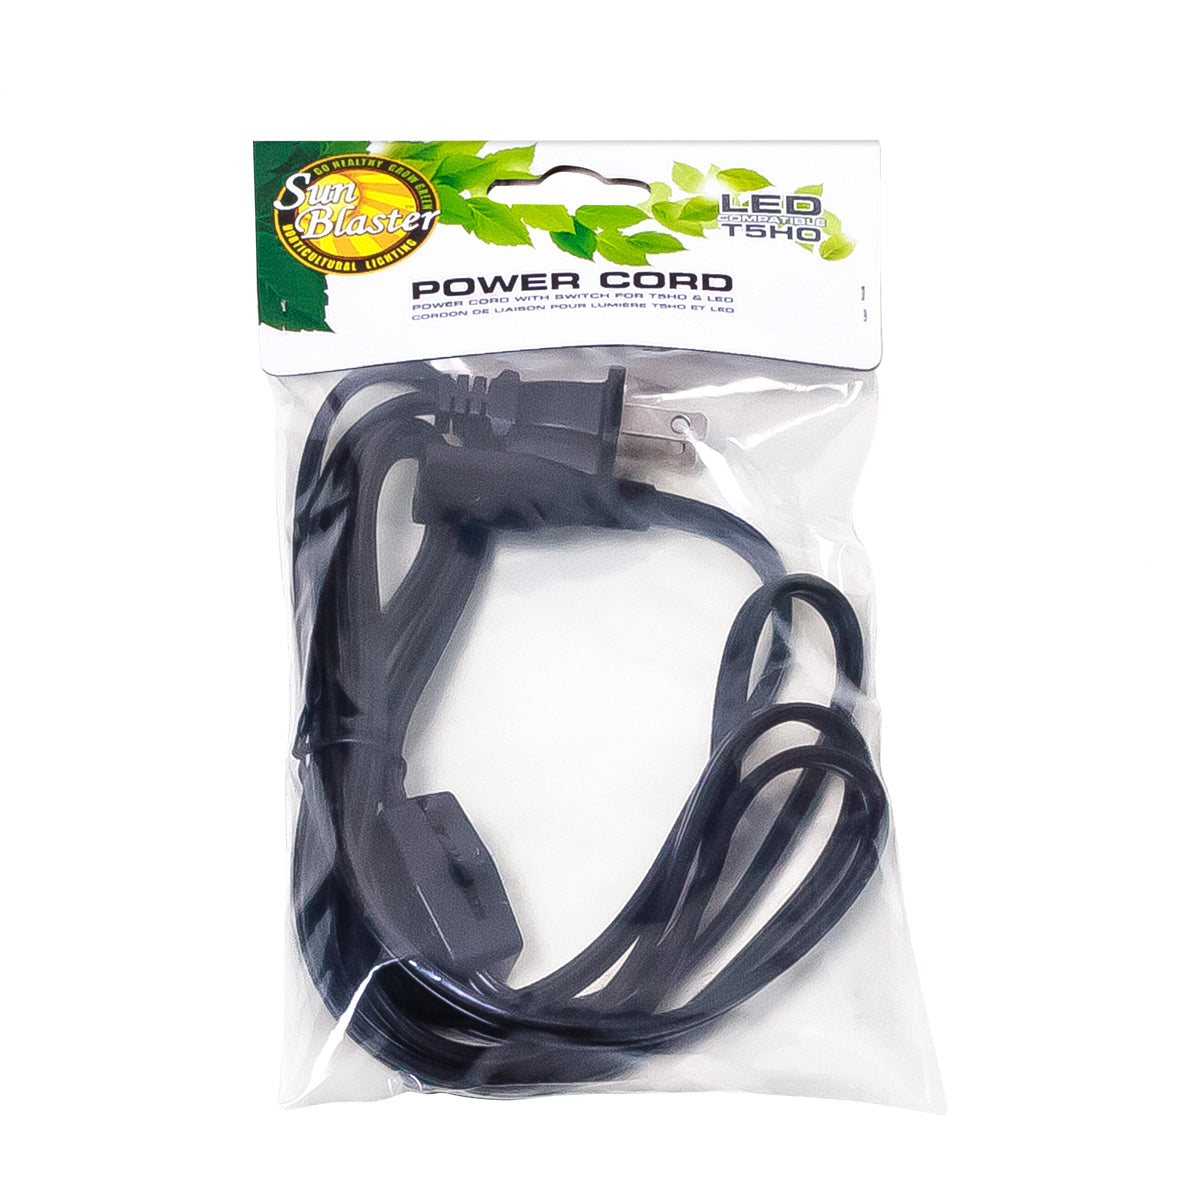 SunBlaster Power Cord W On Off Switch-6 ft